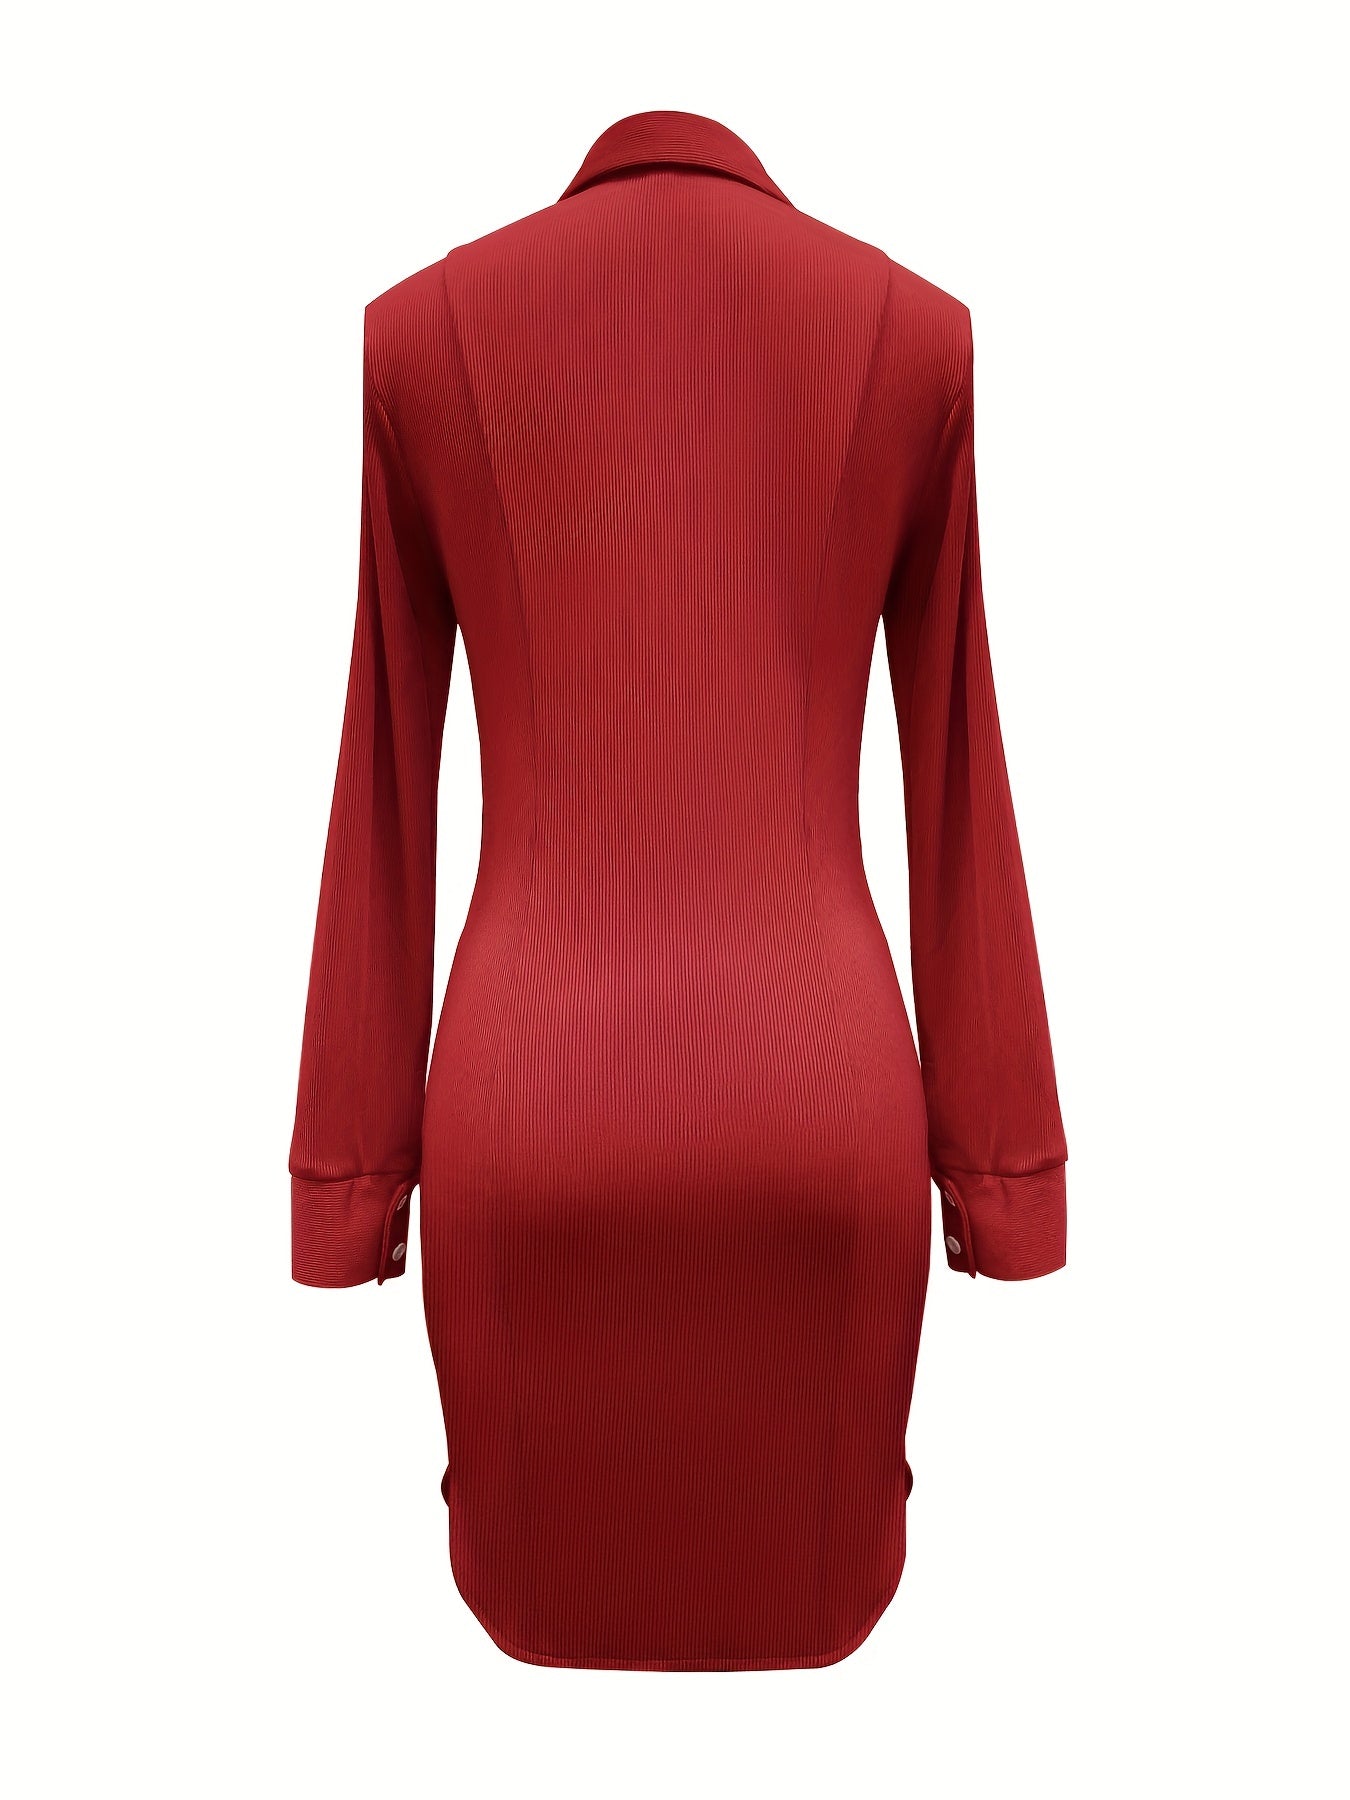 hoombox Solid Single Button Slim Dress, Versatile Long Sleeve Bodycon Dress For Spring & Fall, Women's Clothing